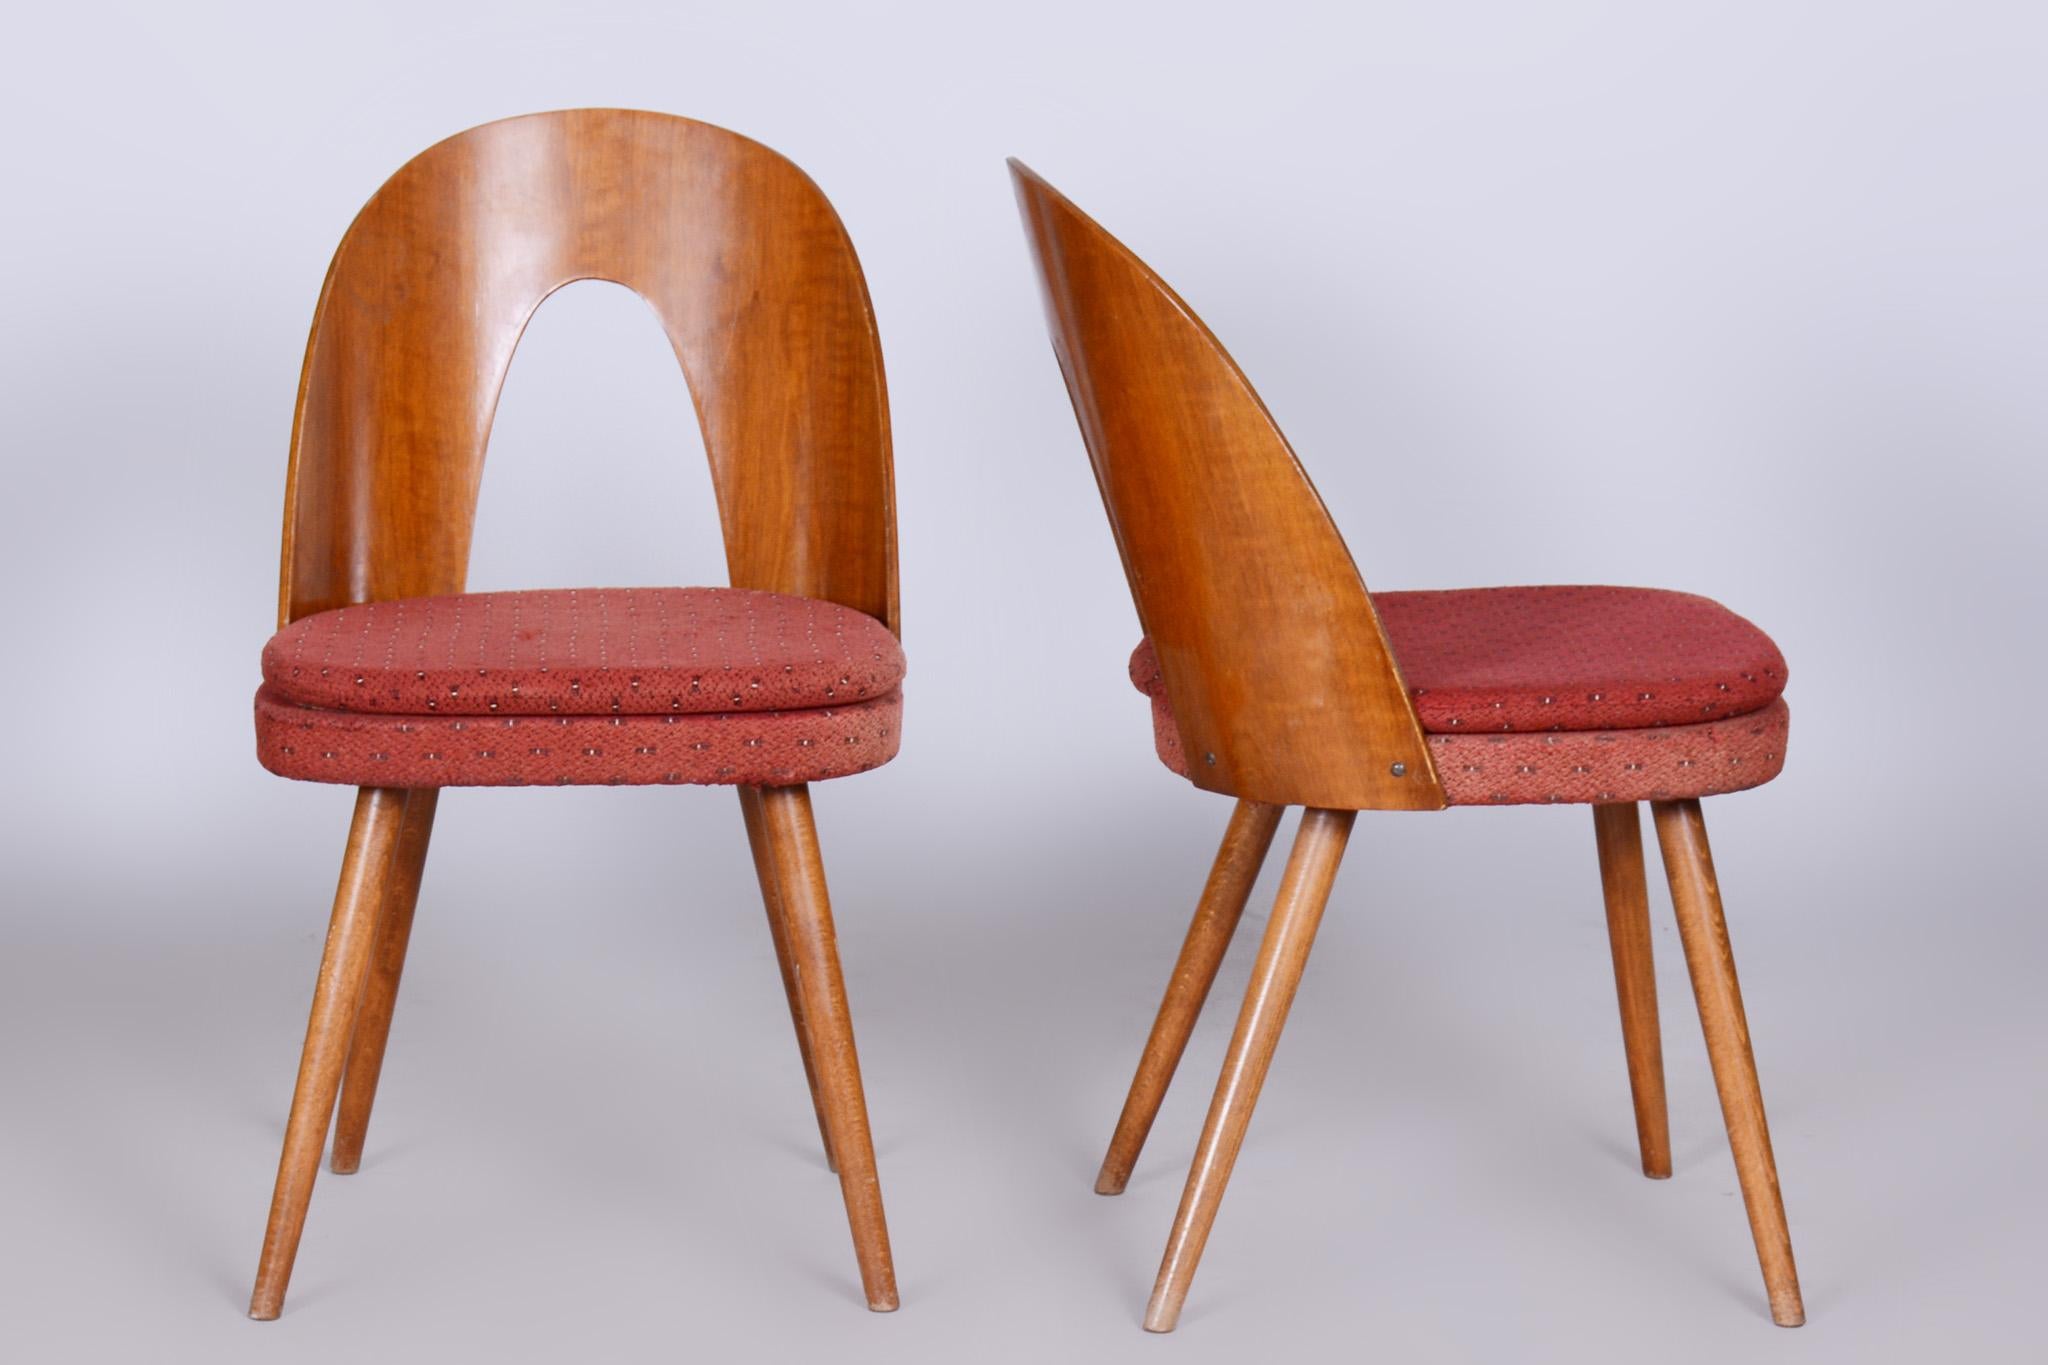 Pair of Mid-Century Chairs Designed by Antonin Suman, 1950s, Czechia For Sale 1